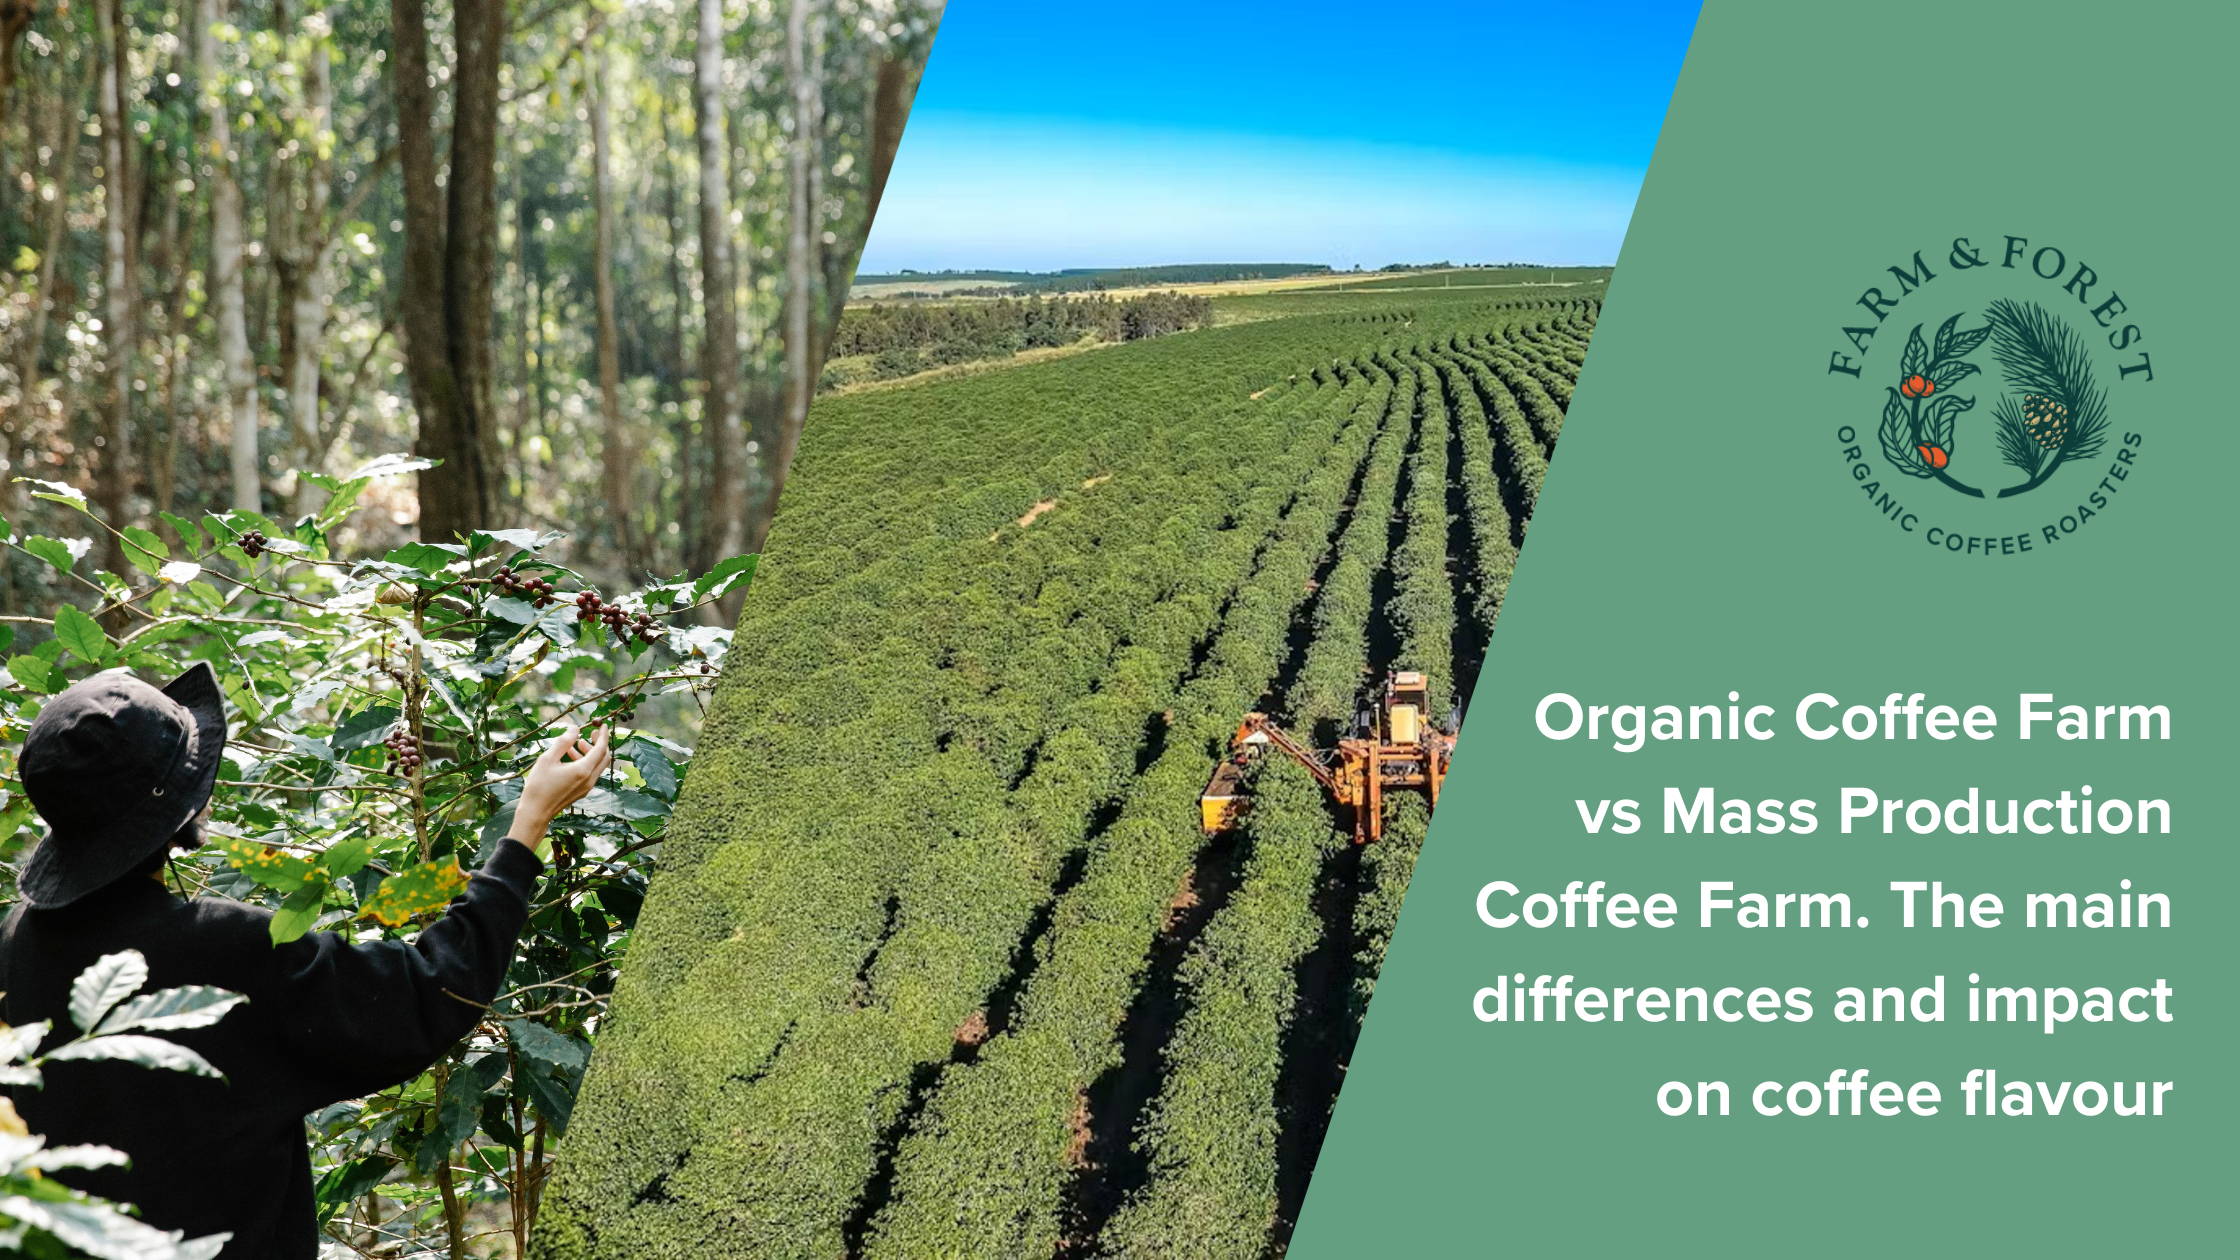 Organic Coffee Farm vs Mass Production Coffee Farm. The main differences and impact on coffee flavour